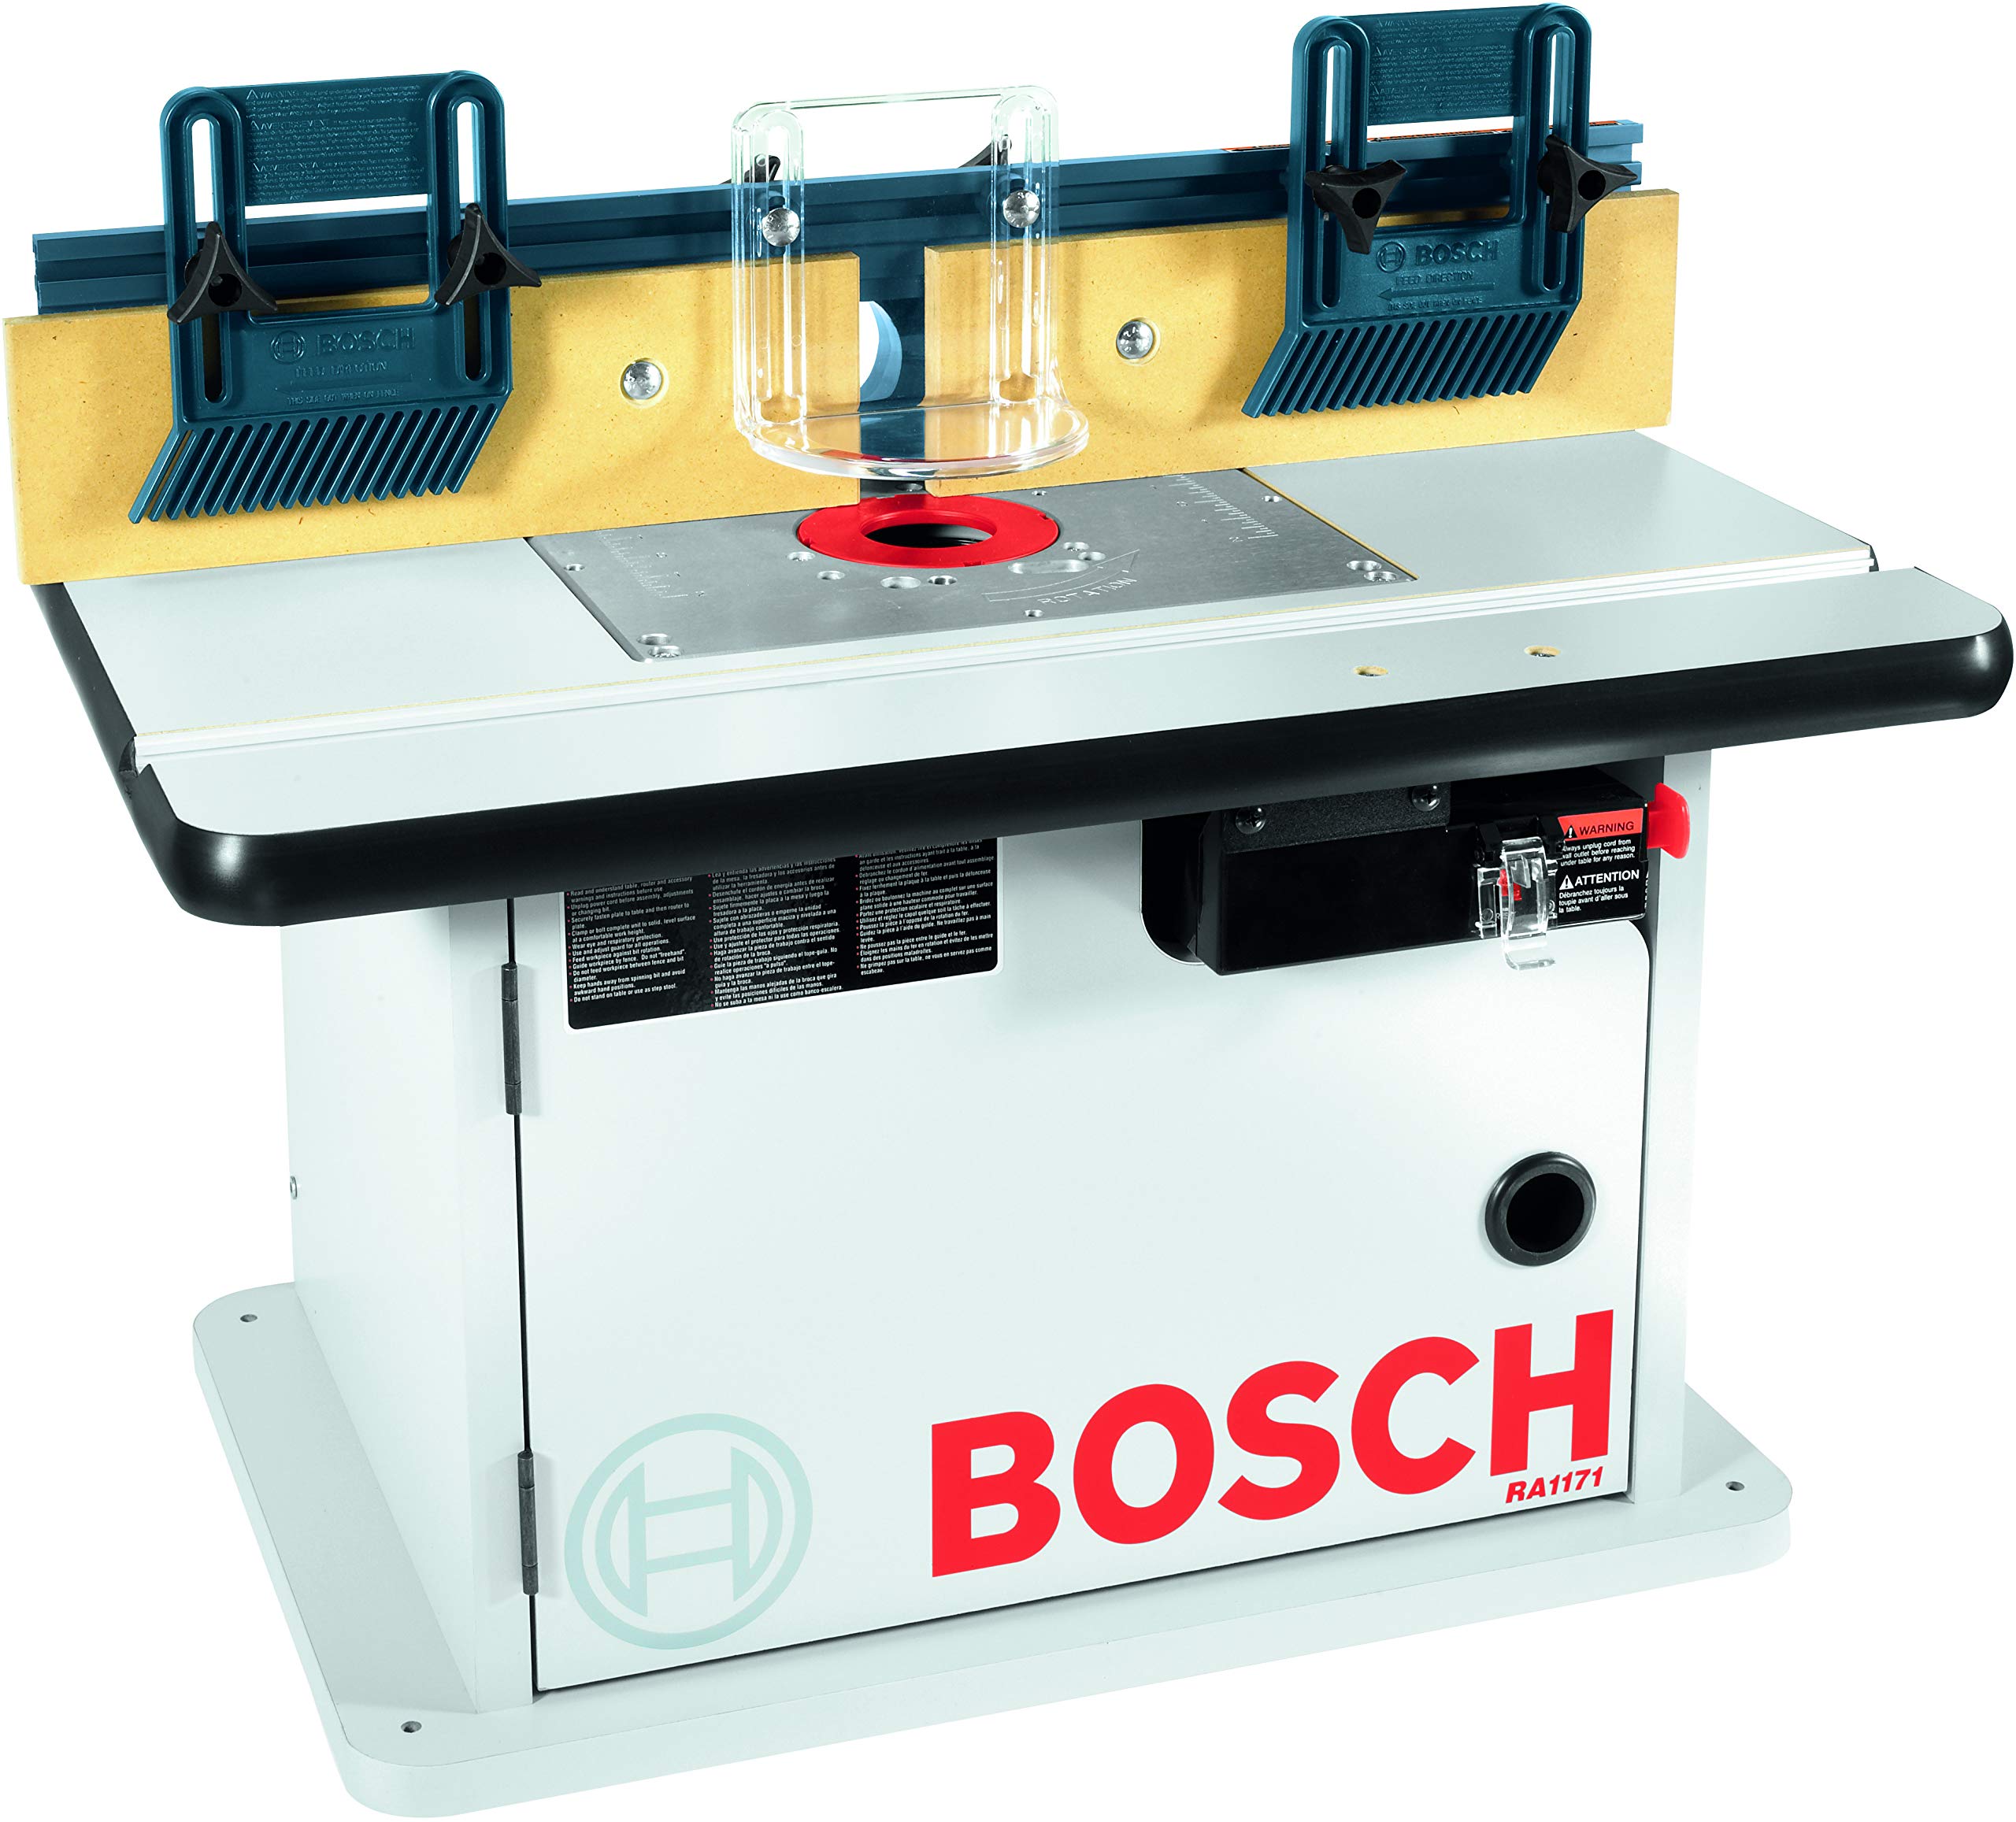 BOSCH RA1171 25-1/2 in. Benchtop Router Table Bundle with RA1165 Under-Table Router Base